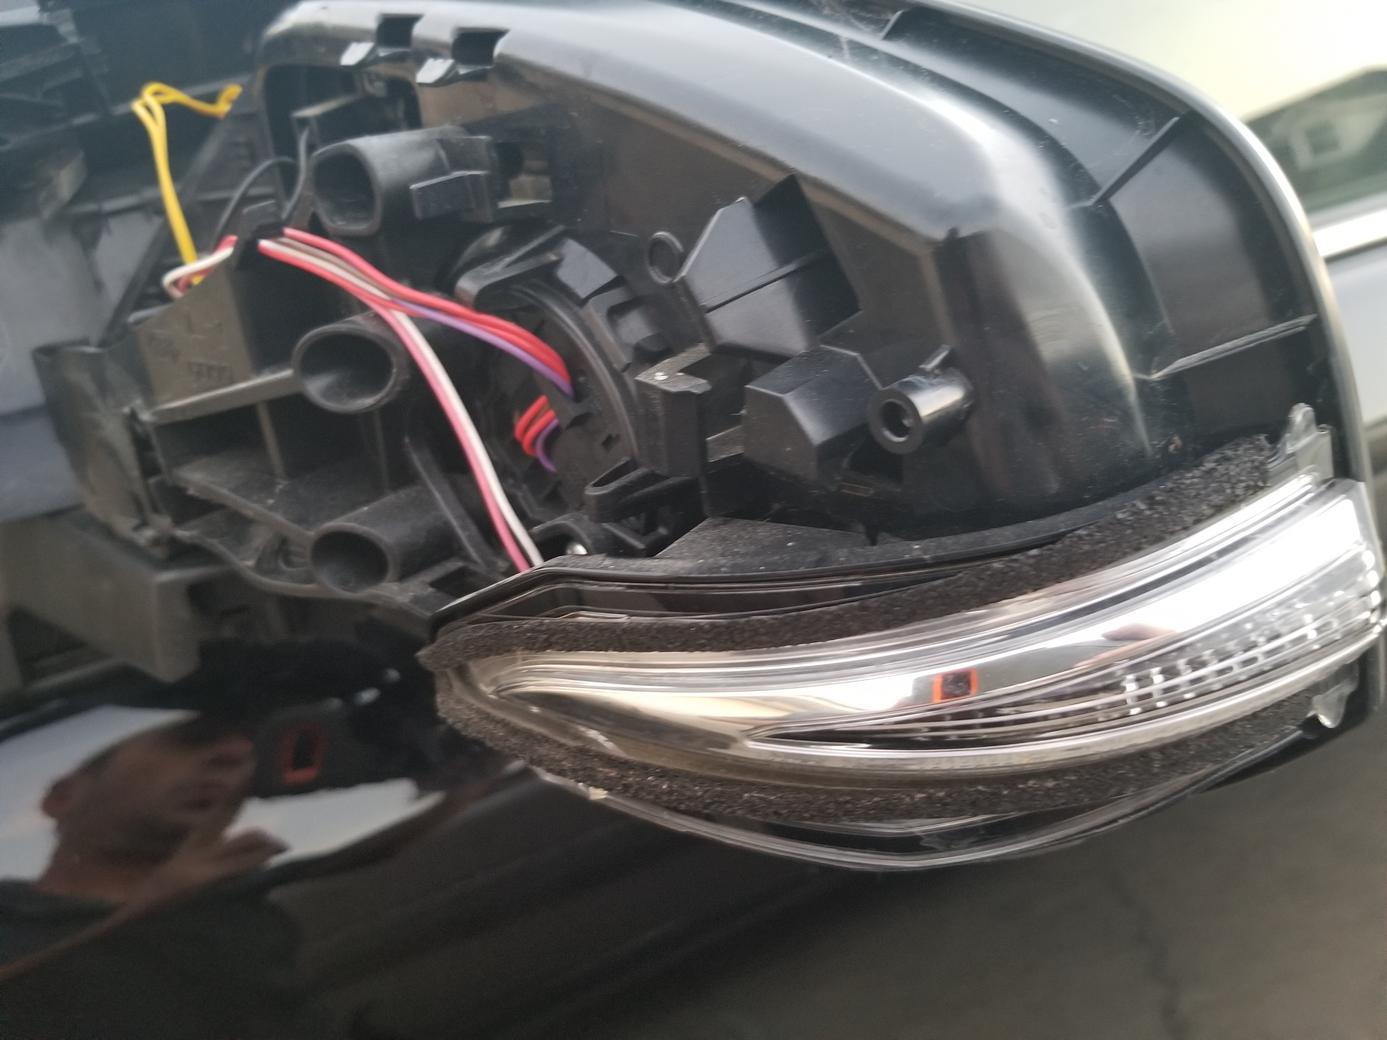 Replace side mirror cap or entire assembly-20181029_181824-jpg